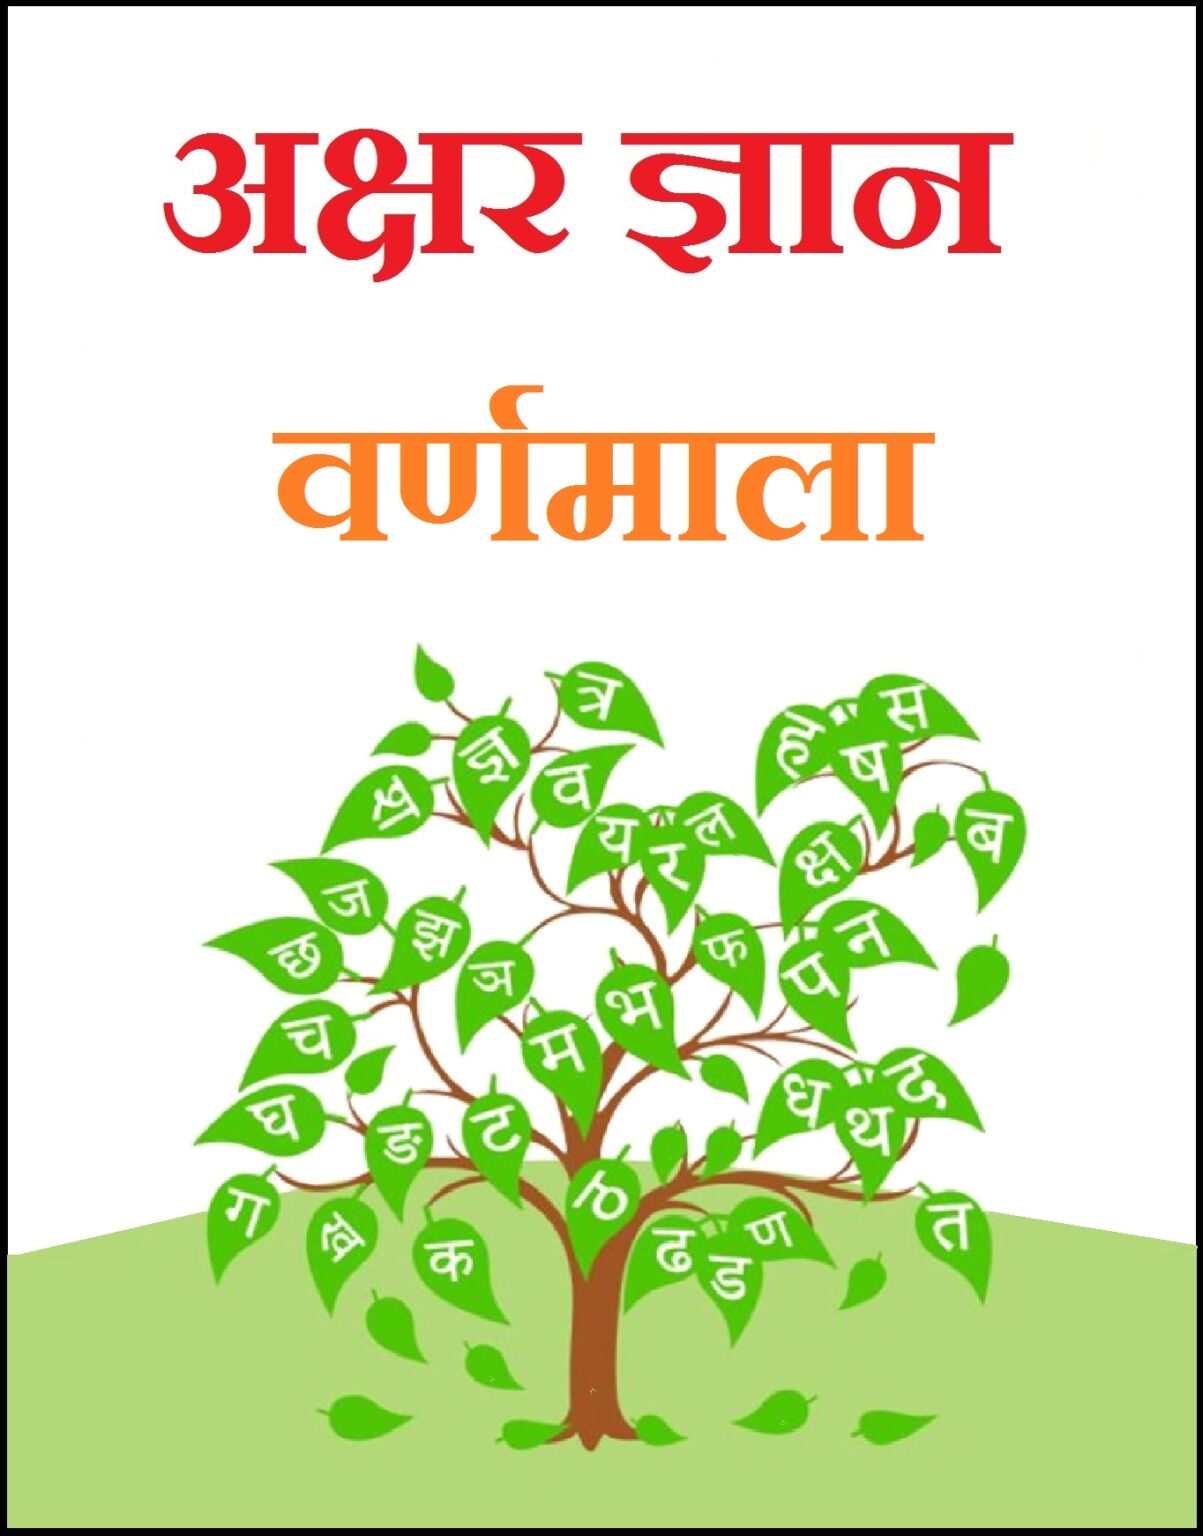 Hindi Learning and Practice Worksheets